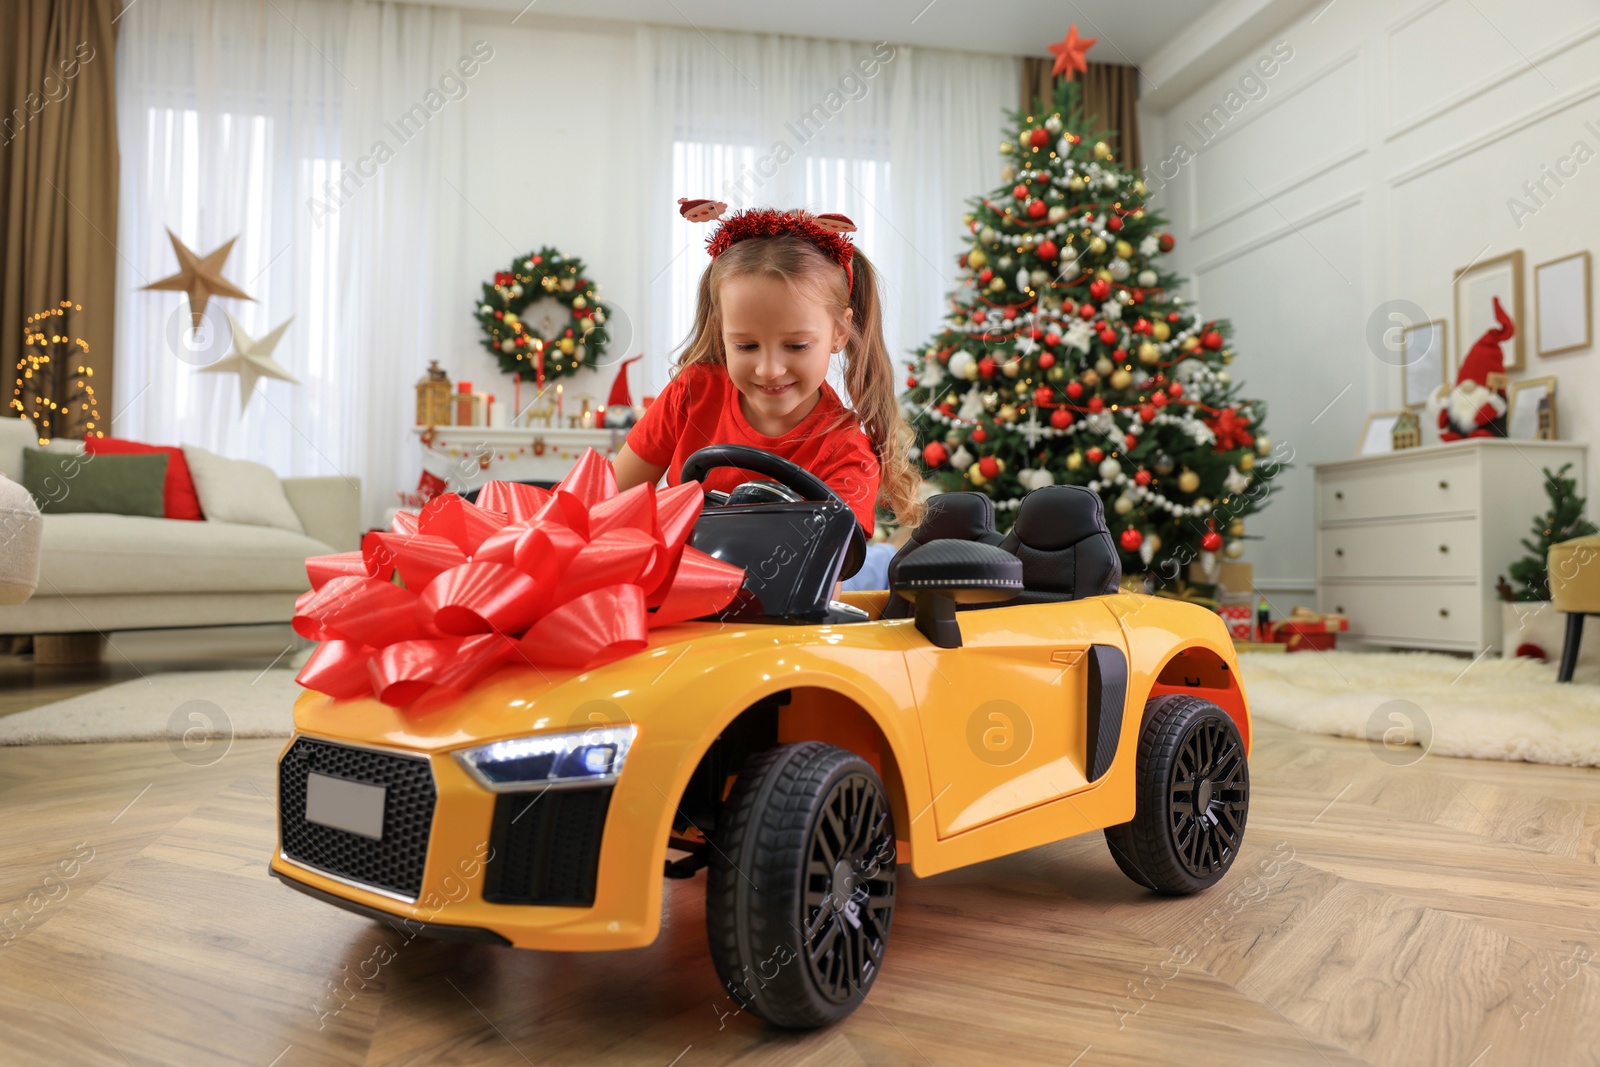 Photo of Cute little girl playing with toy car in room decorated for Christmas